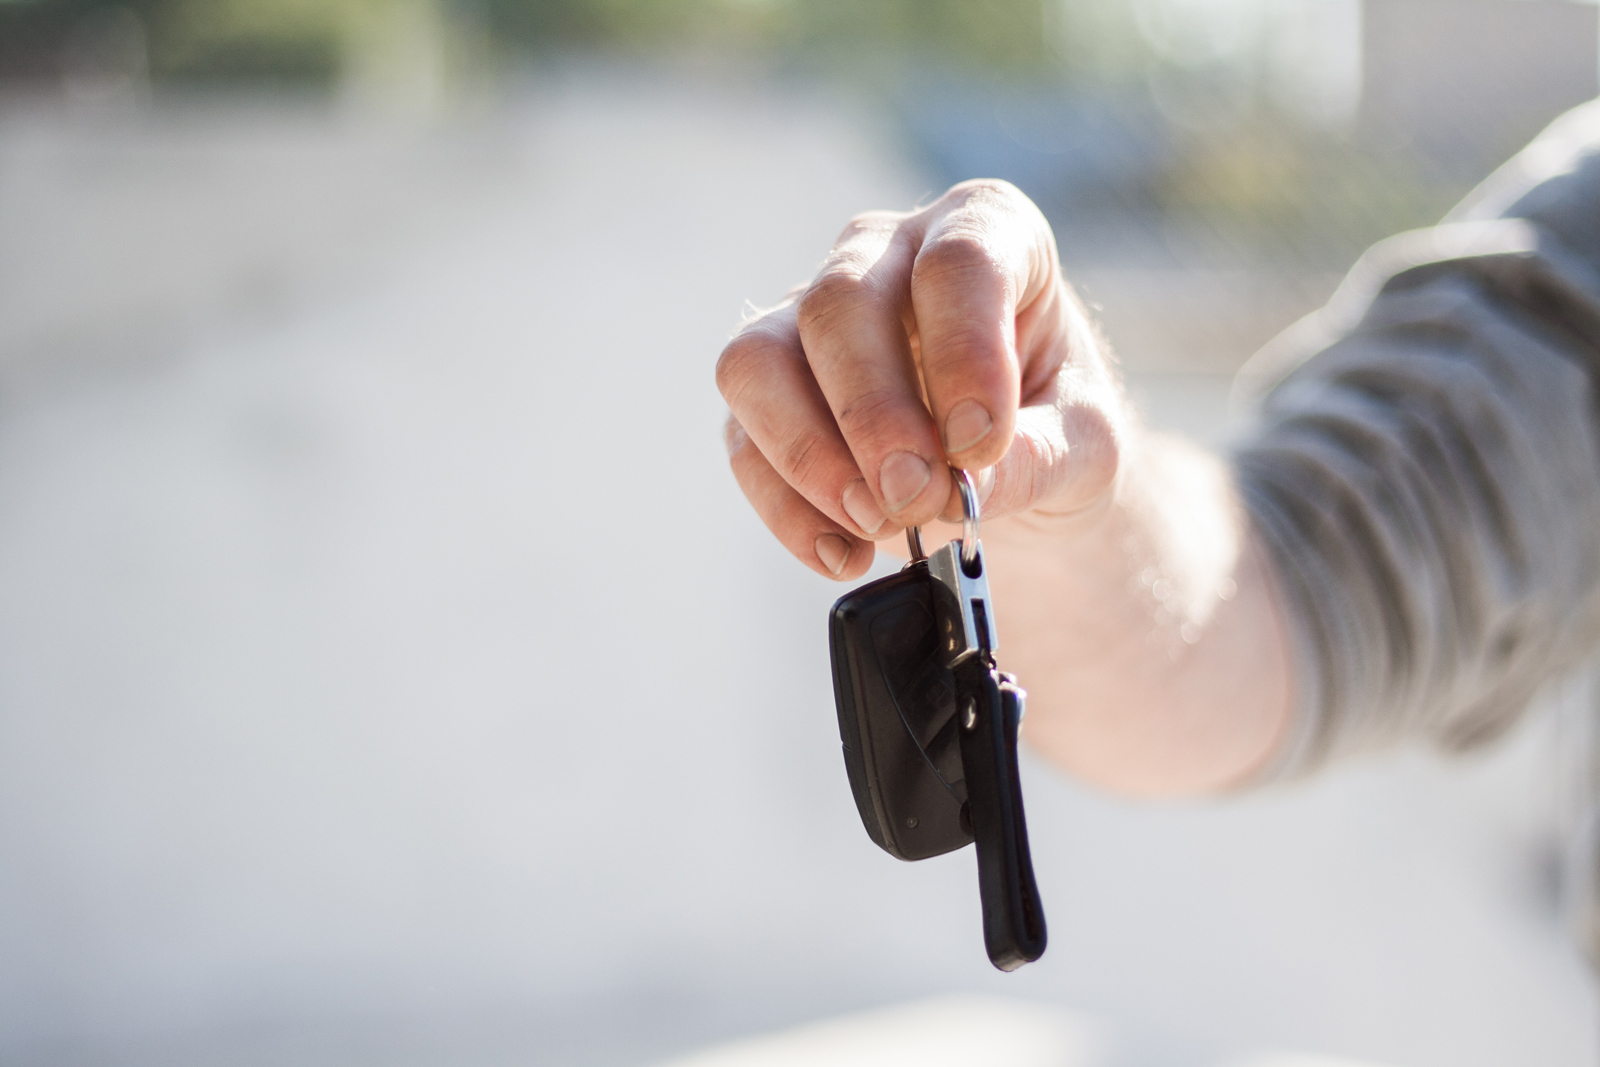 A person handing keys to a new driver